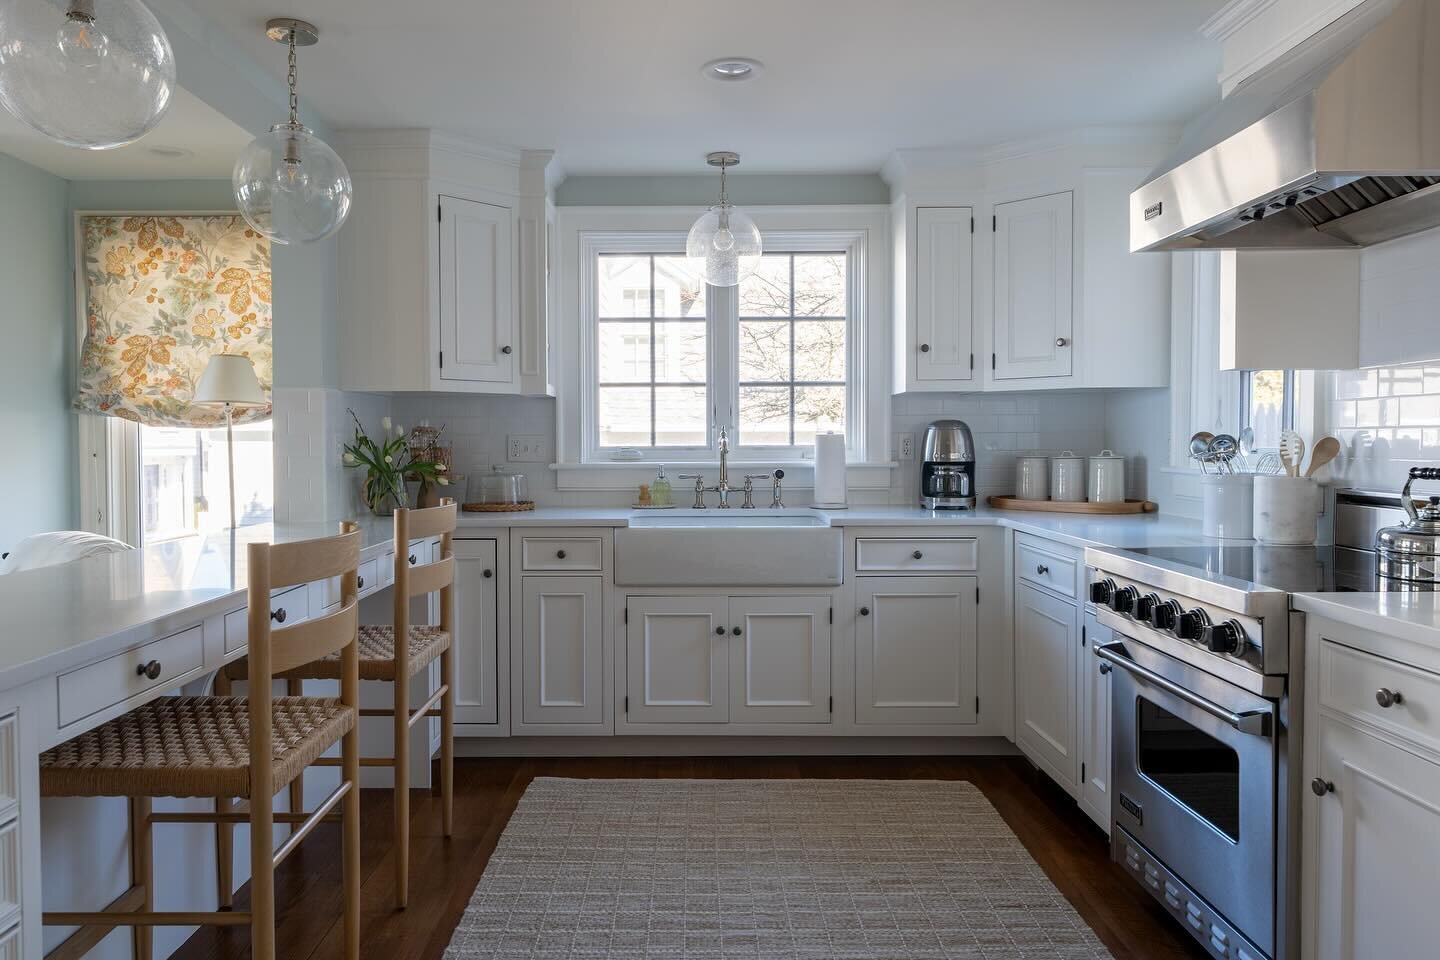 Our latest project, the Water Street Project saw a total transformation of our clients&rsquo; kitchen through thoughtfully considered updates and without any major construction.

After a full-scale interior renovation 20 years prior that included the